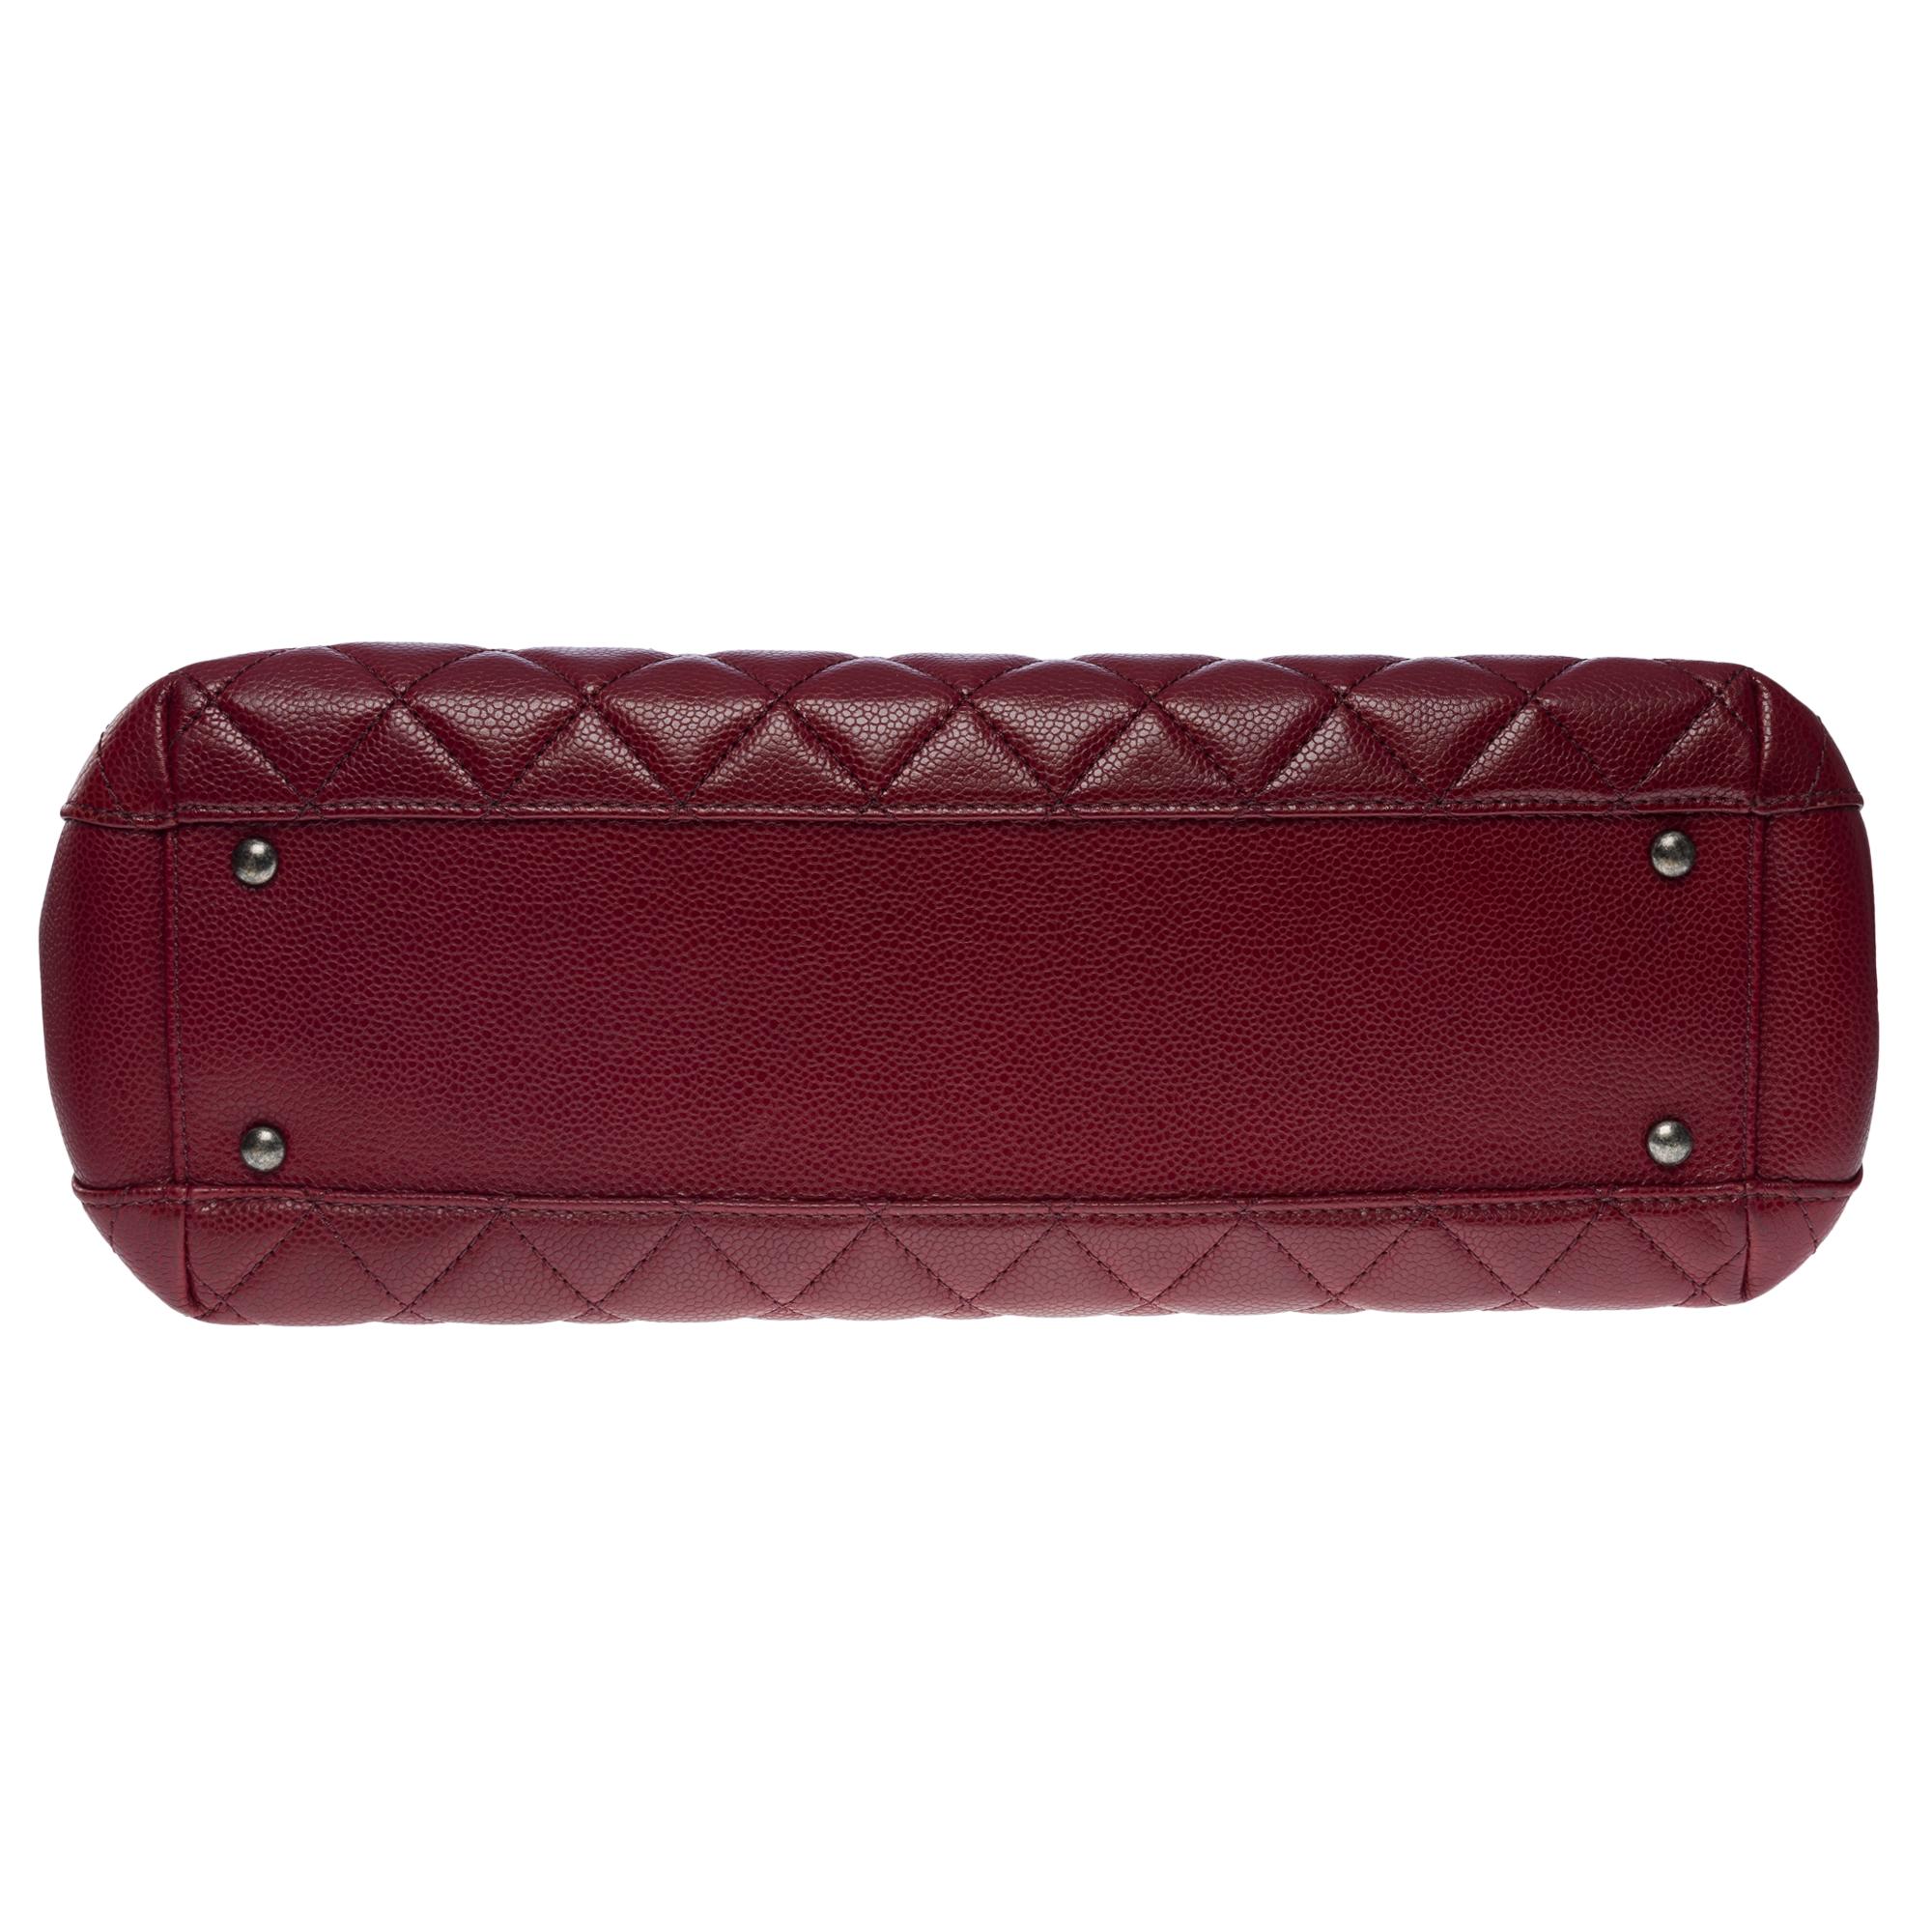 Amazing Chanel Shopping Tote bag in Burgundy Caviar quilted leather, SHW 6